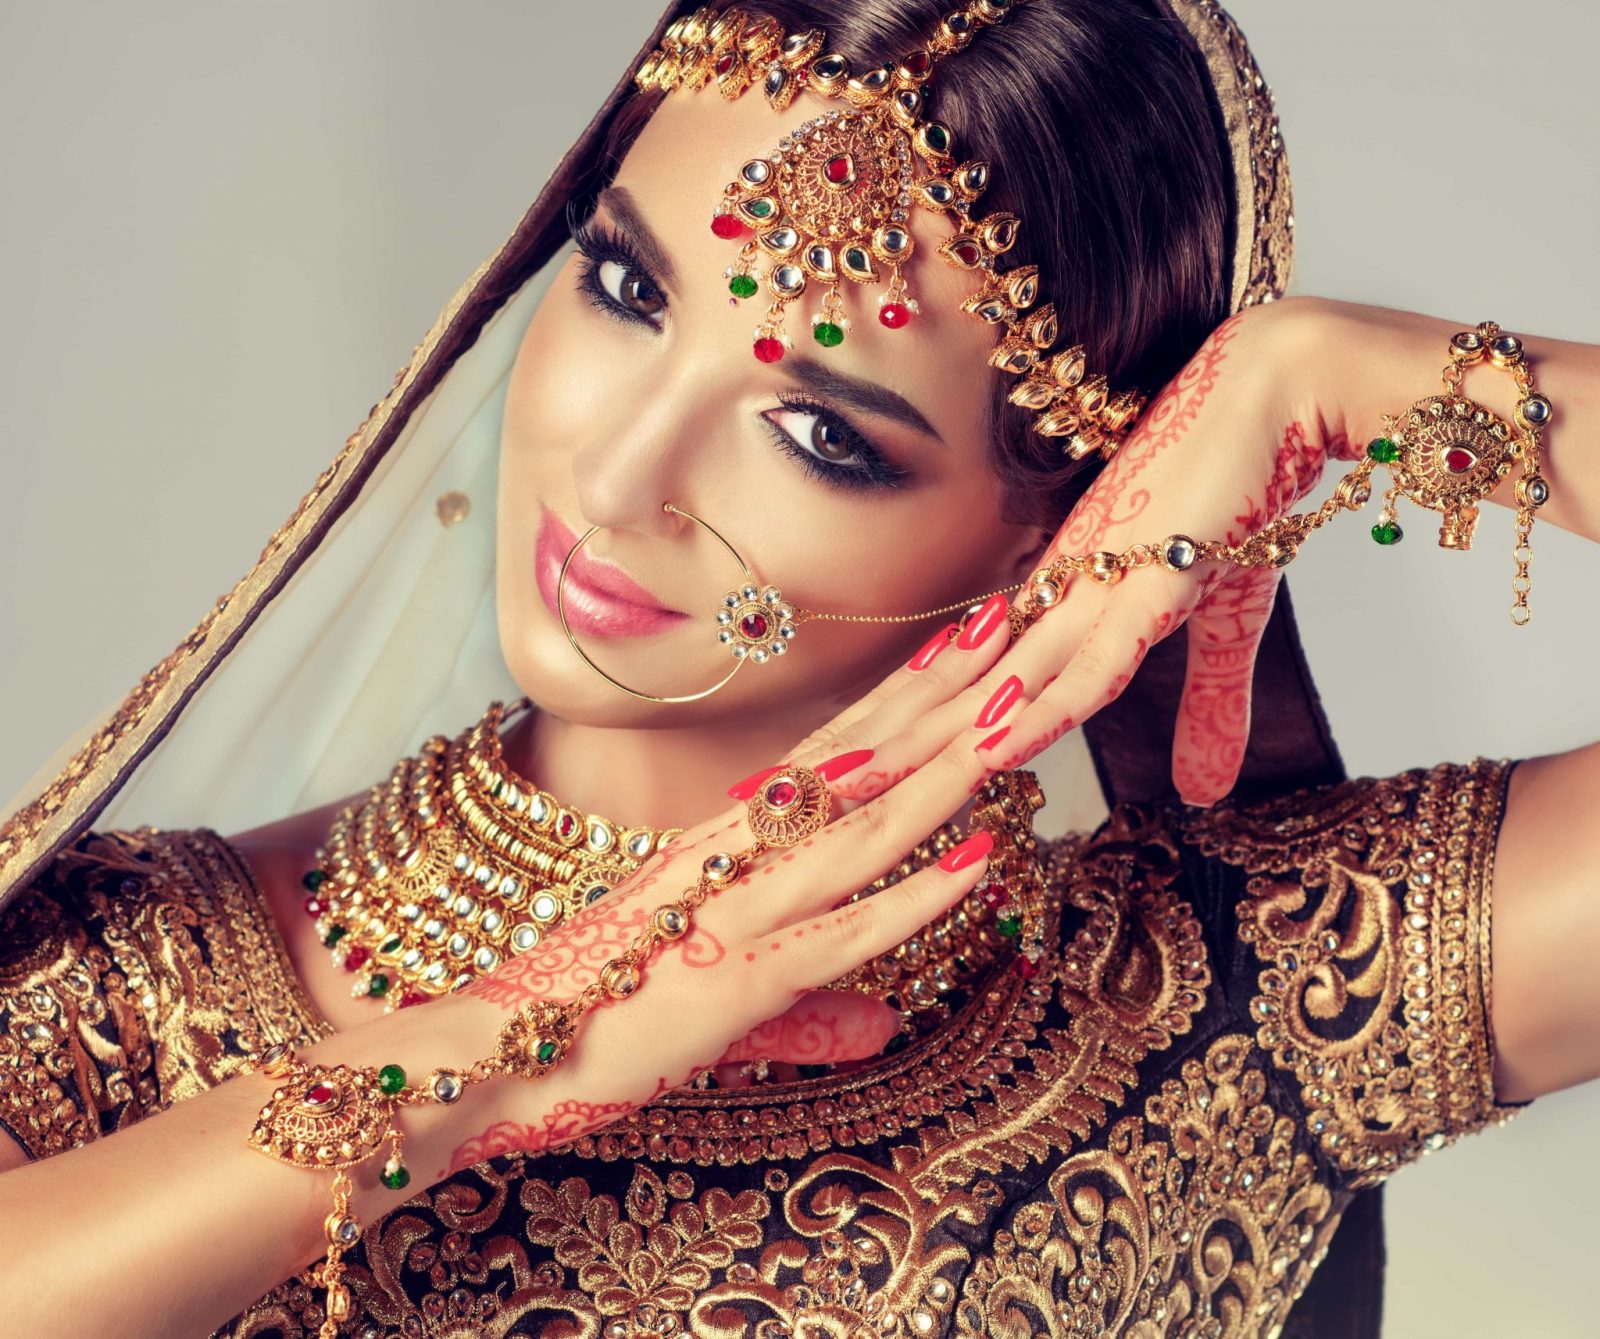 A girl dressed with Indian Jewelry